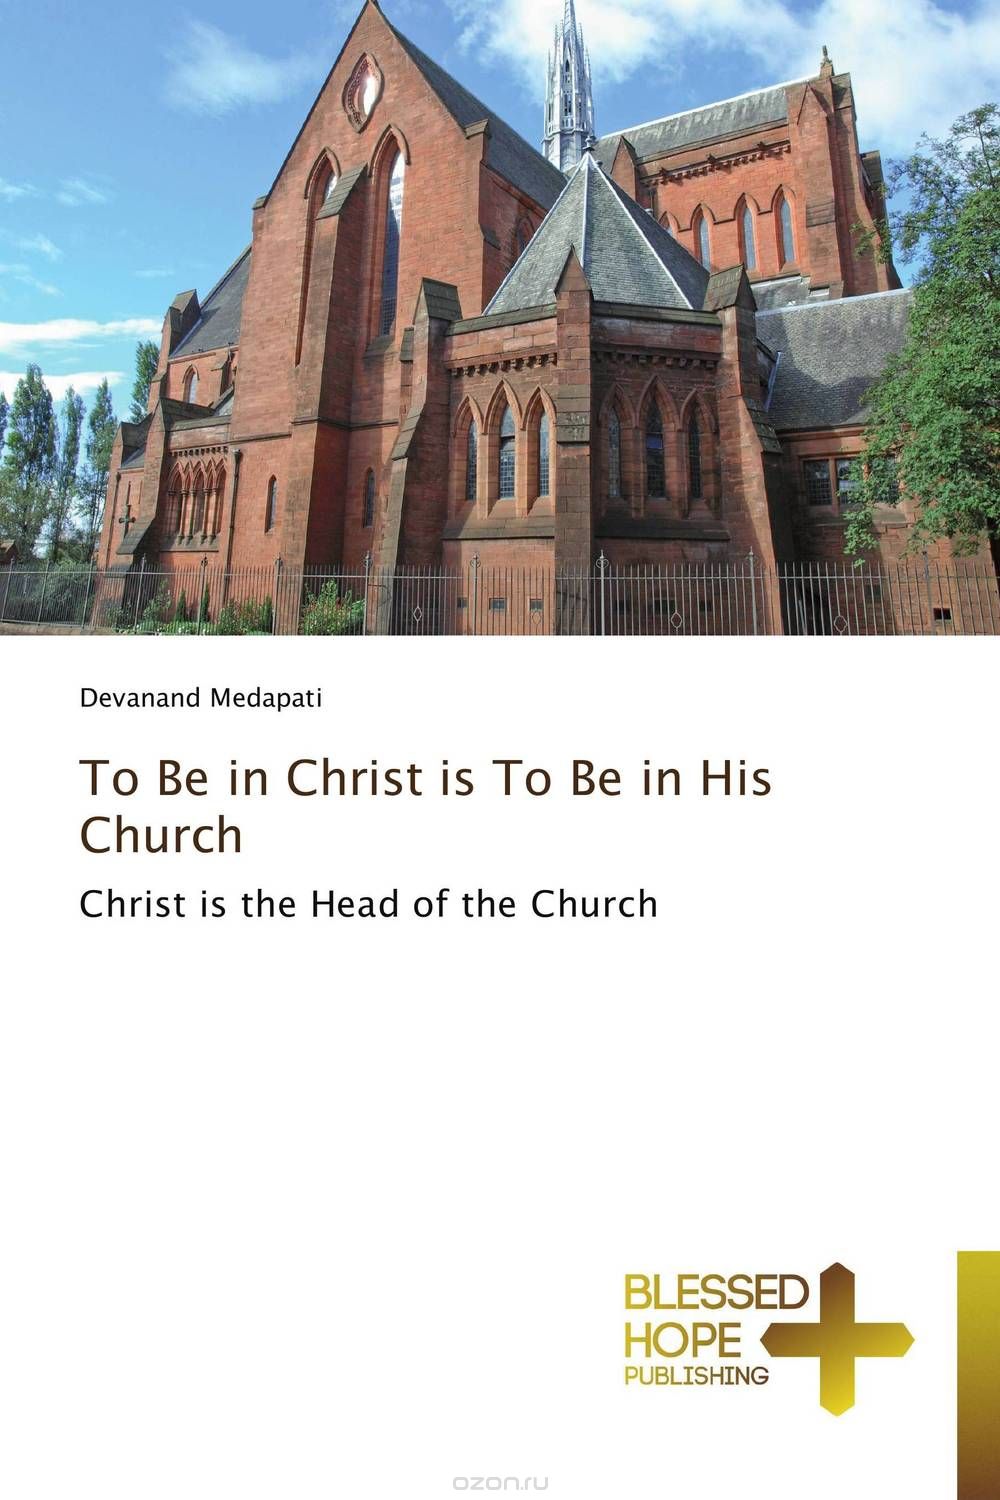 Скачать книгу "To Be in Christ is To Be in His Church"